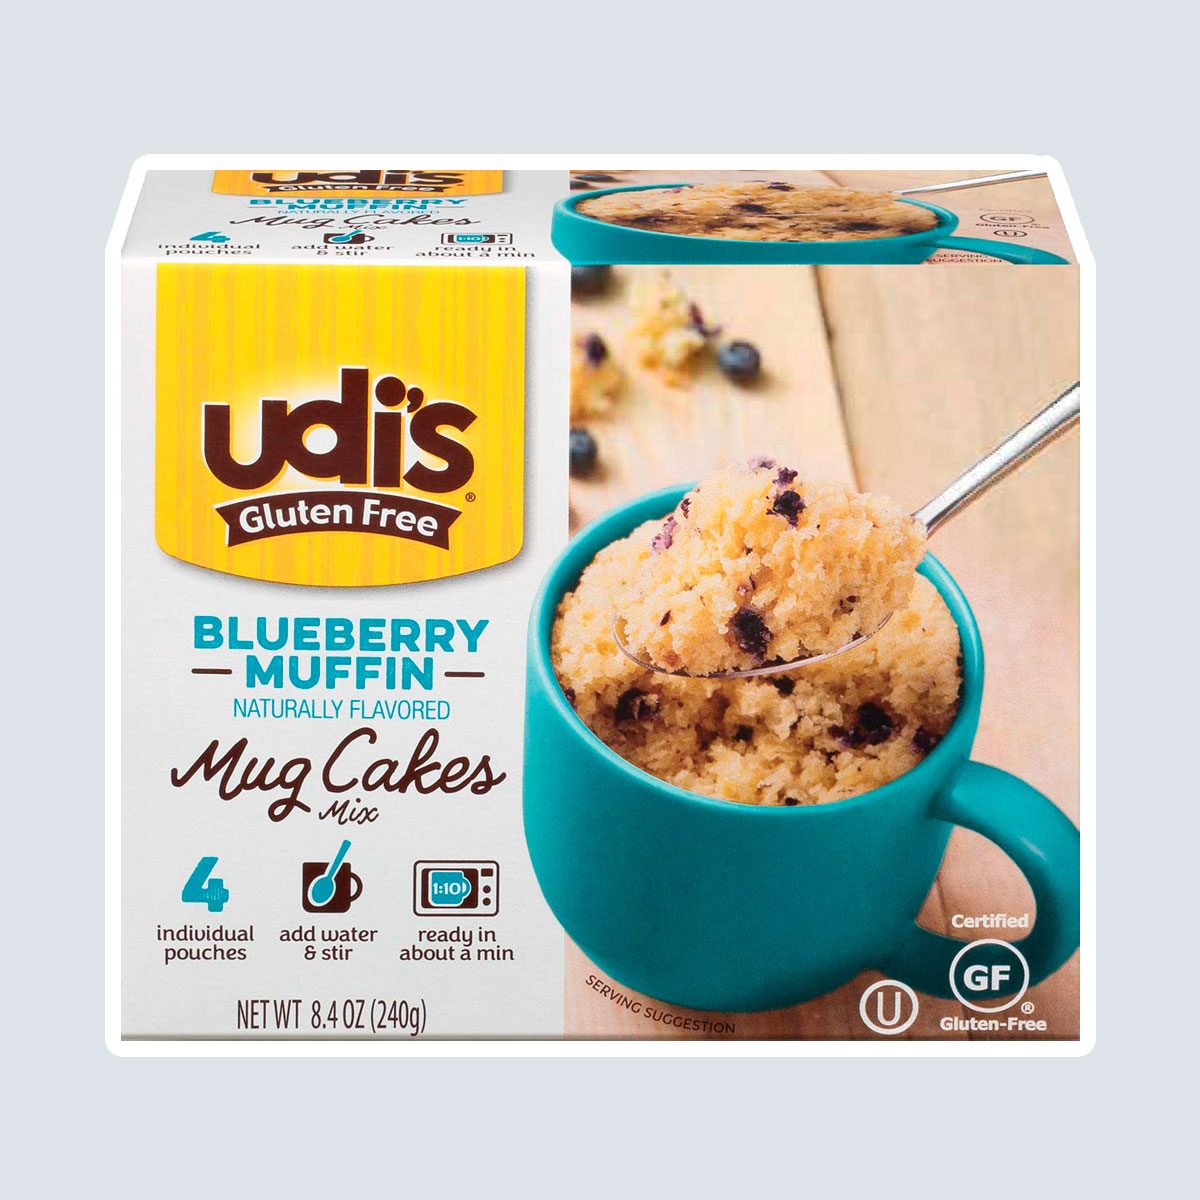 https://www.tasteofhome.com/wp-content/uploads/2019/09/udis-blueberry-muffin-mix-1.jpg?fit=700%2C700